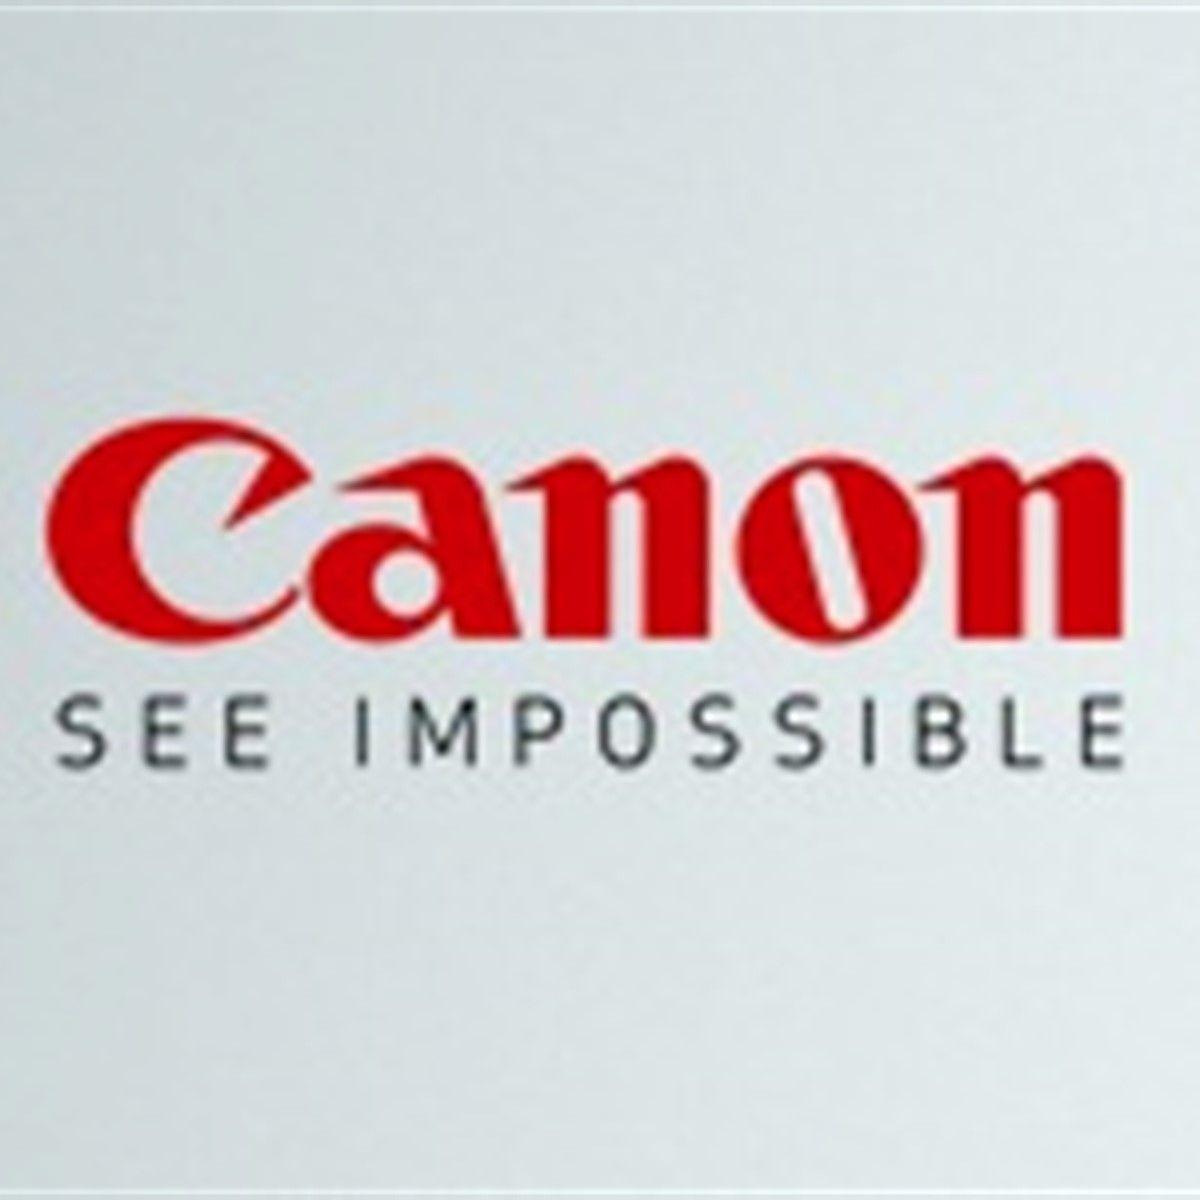 Canon See Impossible Logo - See Impossible': Canon counts down to... something. *UPDATED ...